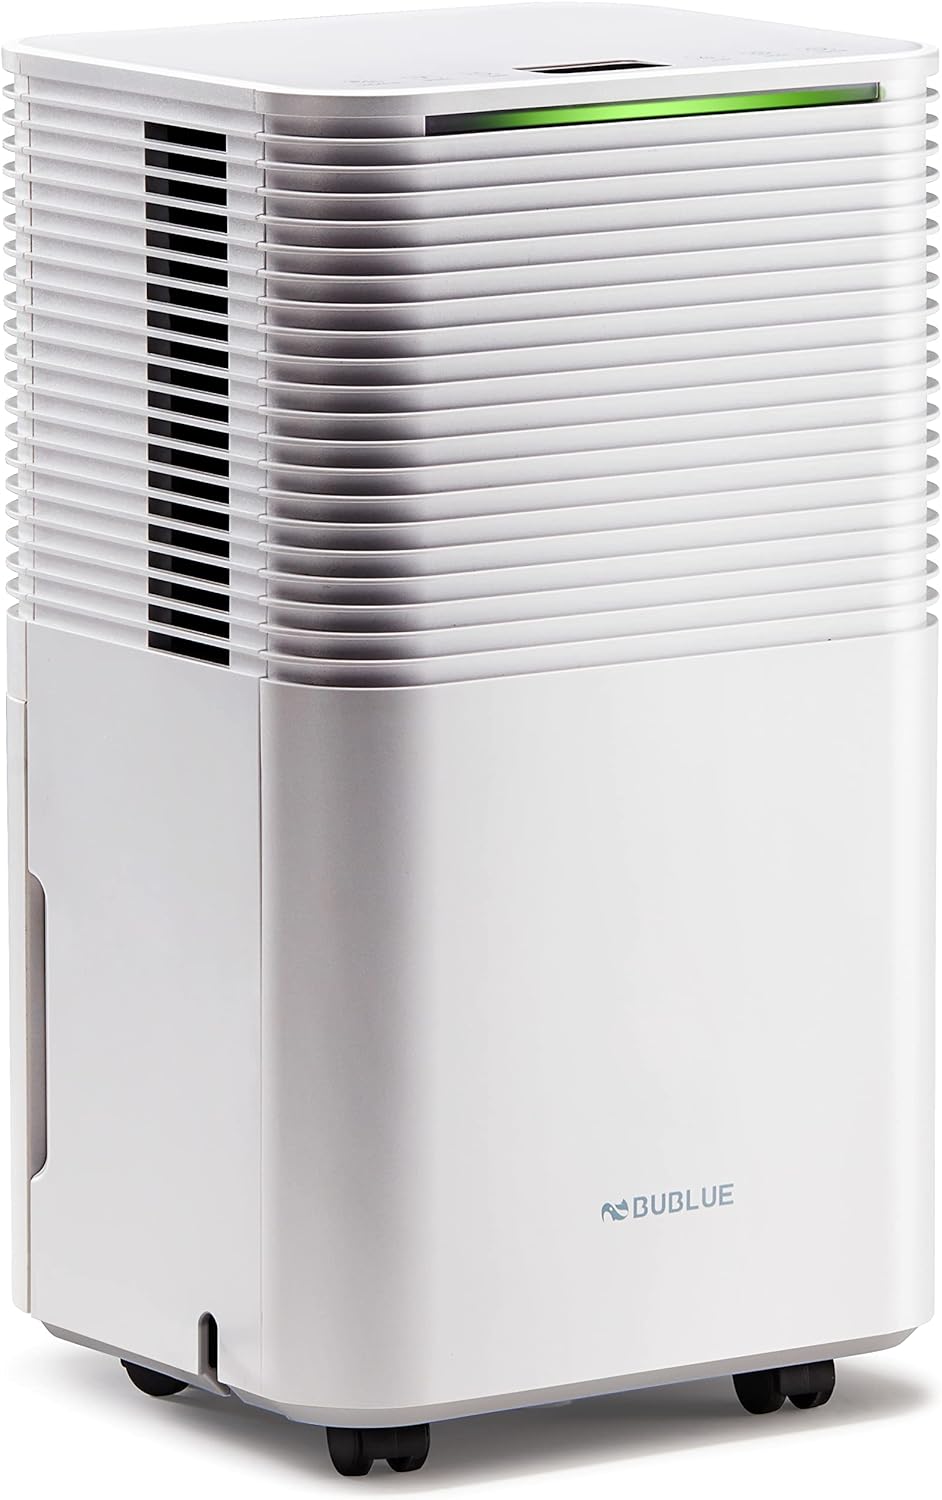 BUBLUE 2000 Sq. Ft Dehumidifier for Basements, Home and Large Room with Auto or Manual Drainage | 36 db Industry Leading Noise Reducing | Integrated Air Filters, 3 Operation Modes, Clothes Drying